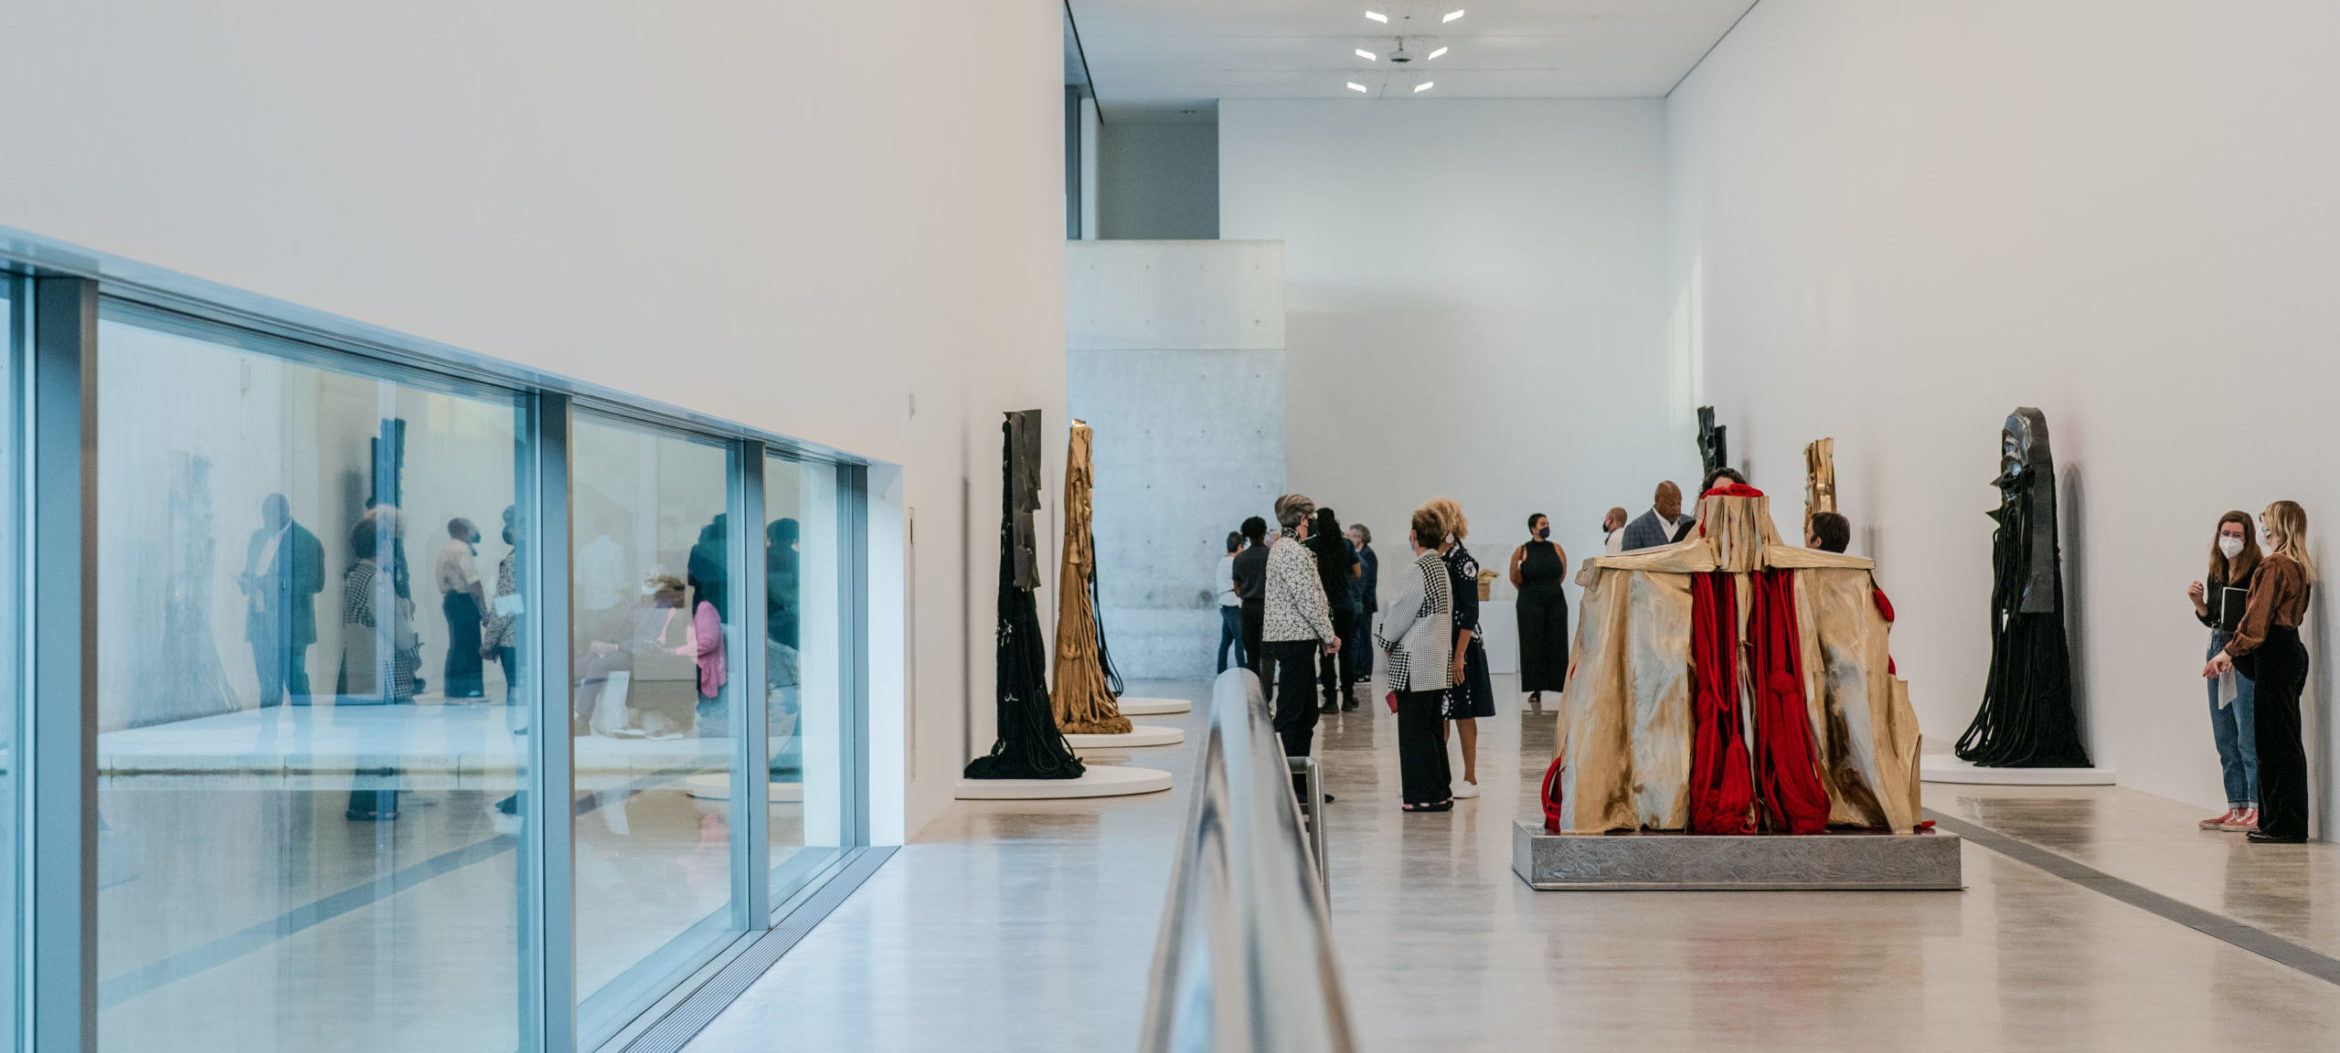 Opening reception of "Barbara Chase-Riboud" Monumentale: "The Bronzes" at the Pulitzer Arts Foundation, Photography by Virginia Harold.